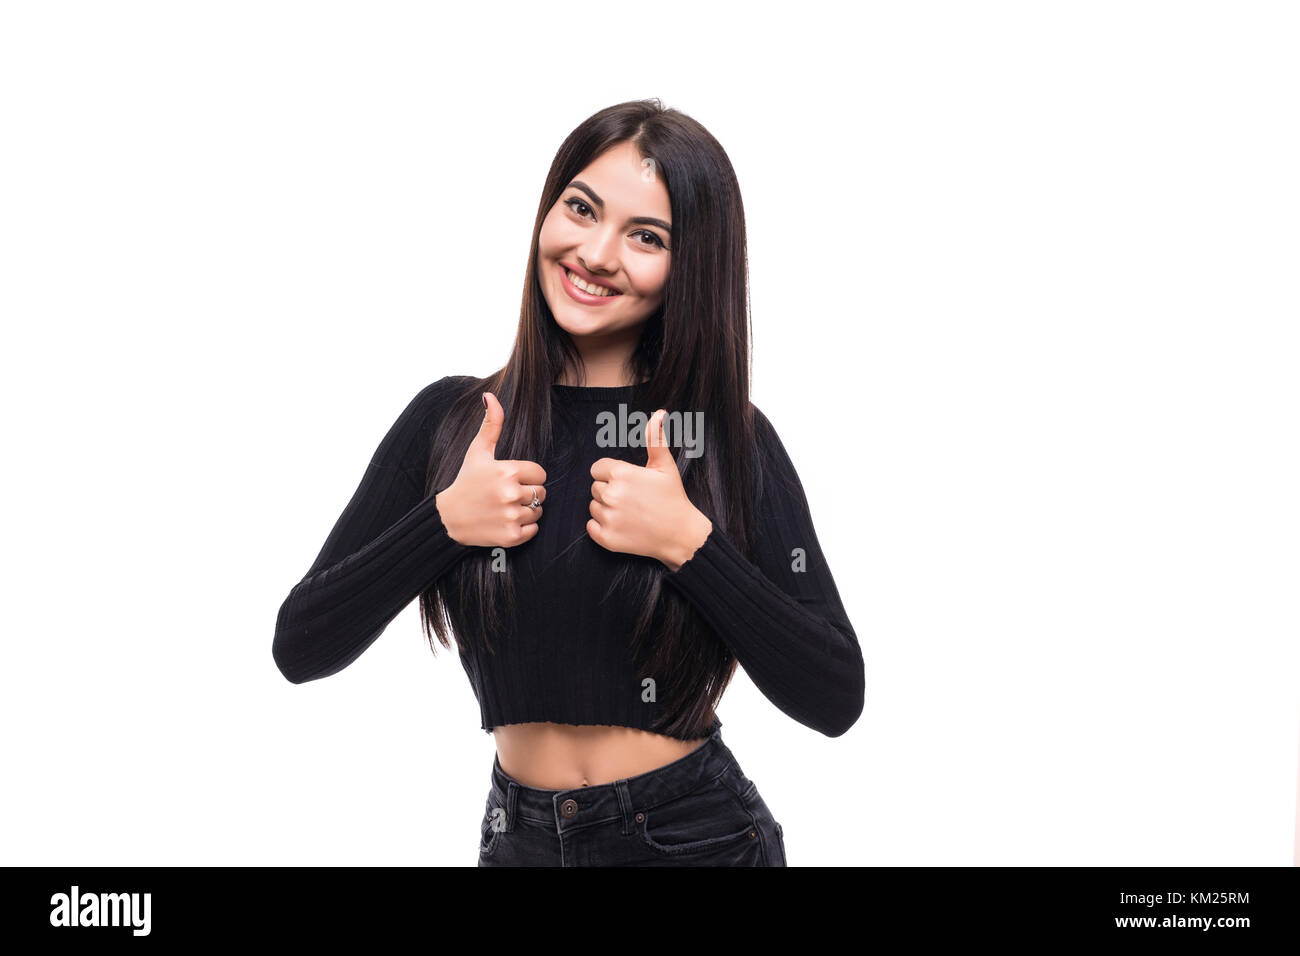 Beautiful woman porttrait showing thumbs up, isolated over a white background Stock Photo